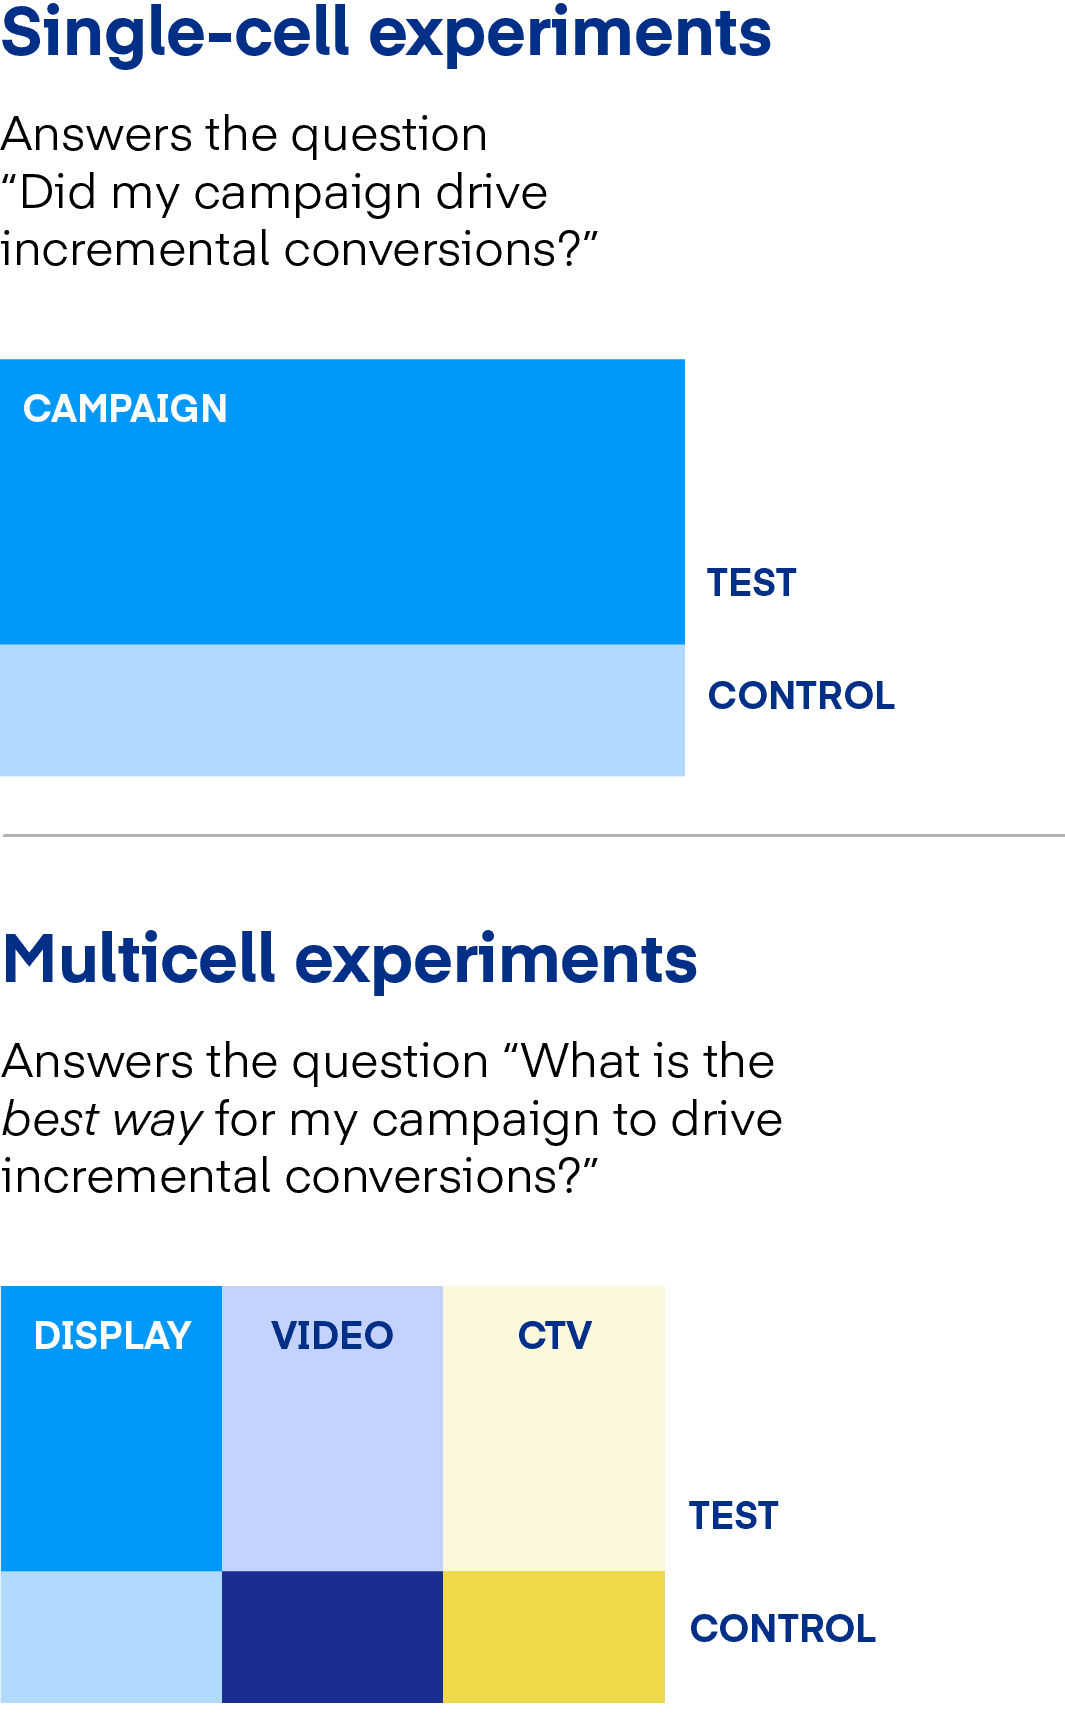 Single-cell experiments vs multicell experiments